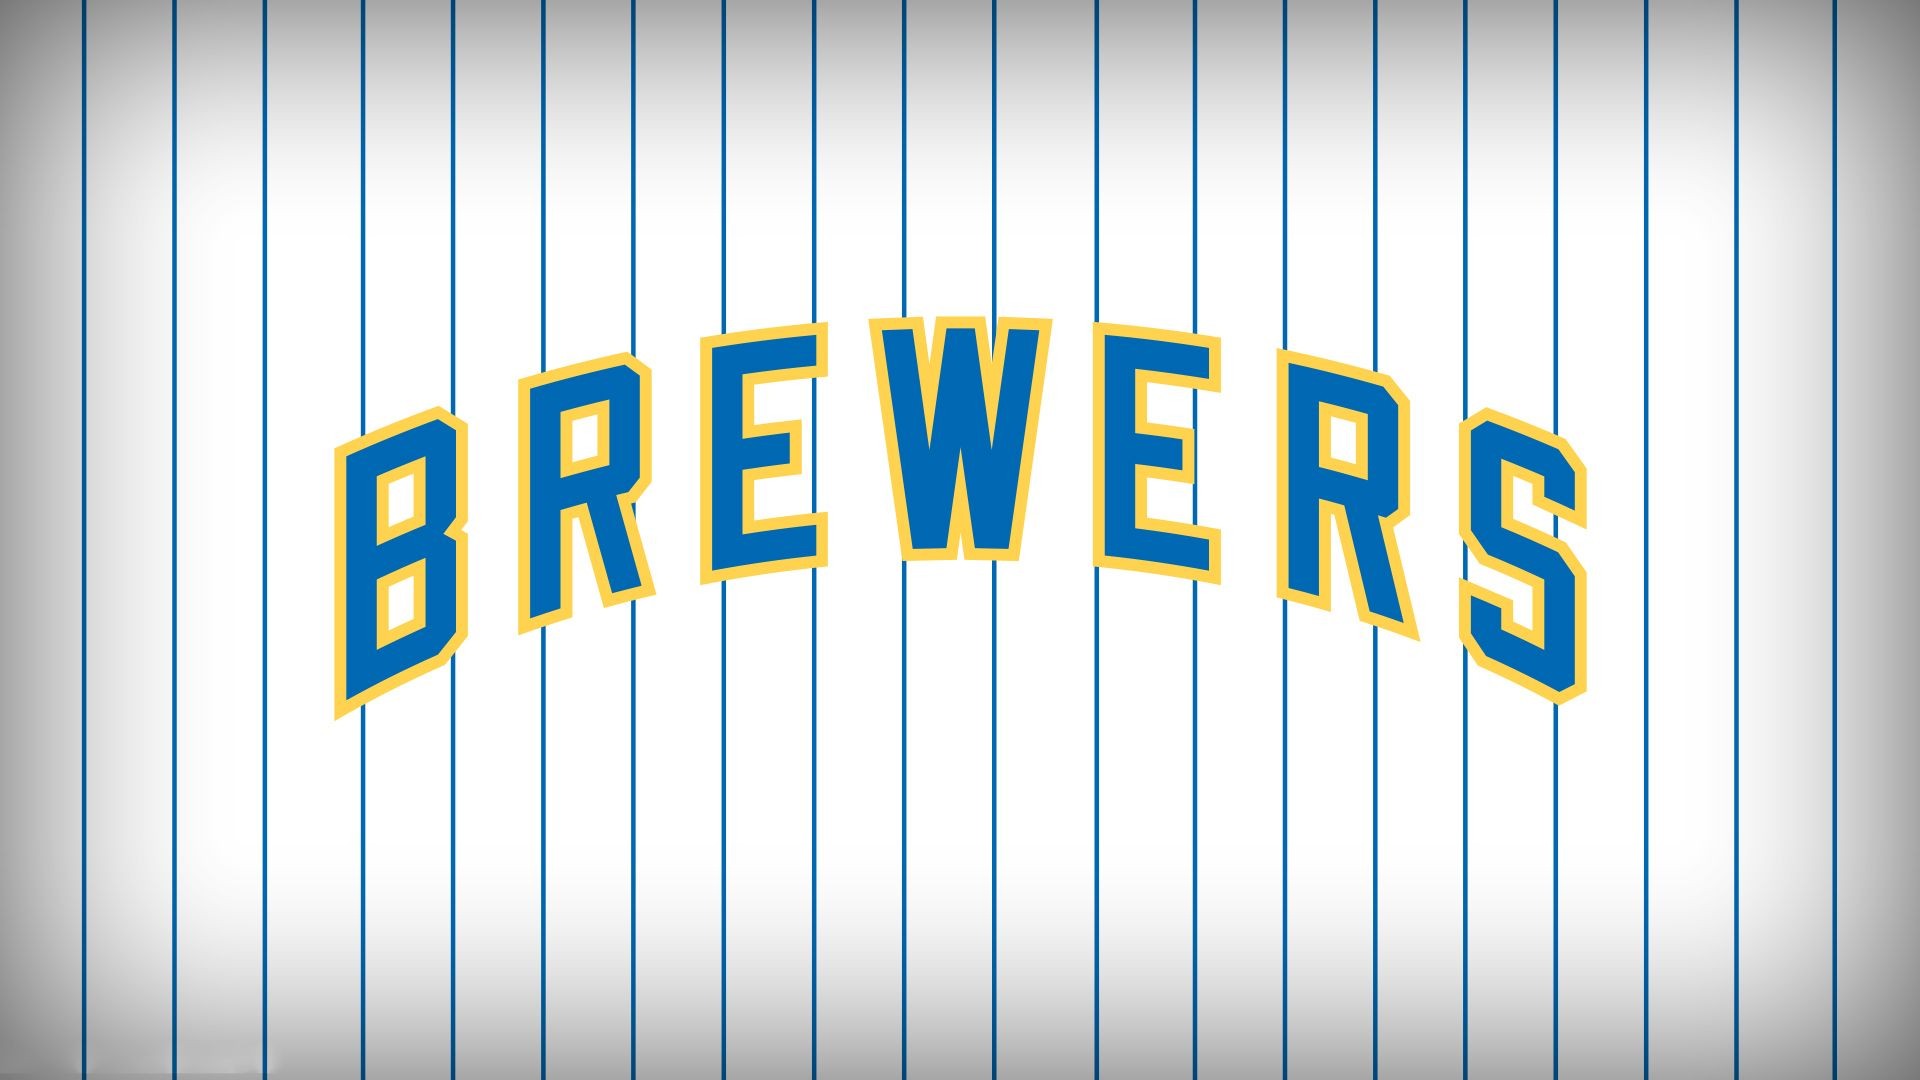 HD Desktop Wallpaper Milwaukee Brewers with high-resolution 1920x1080 pixel. You can use this wallpaper for Mac Desktop Wallpaper, Laptop Screensavers, Android Wallpapers, Tablet or iPhone Home Screen and another mobile phone device